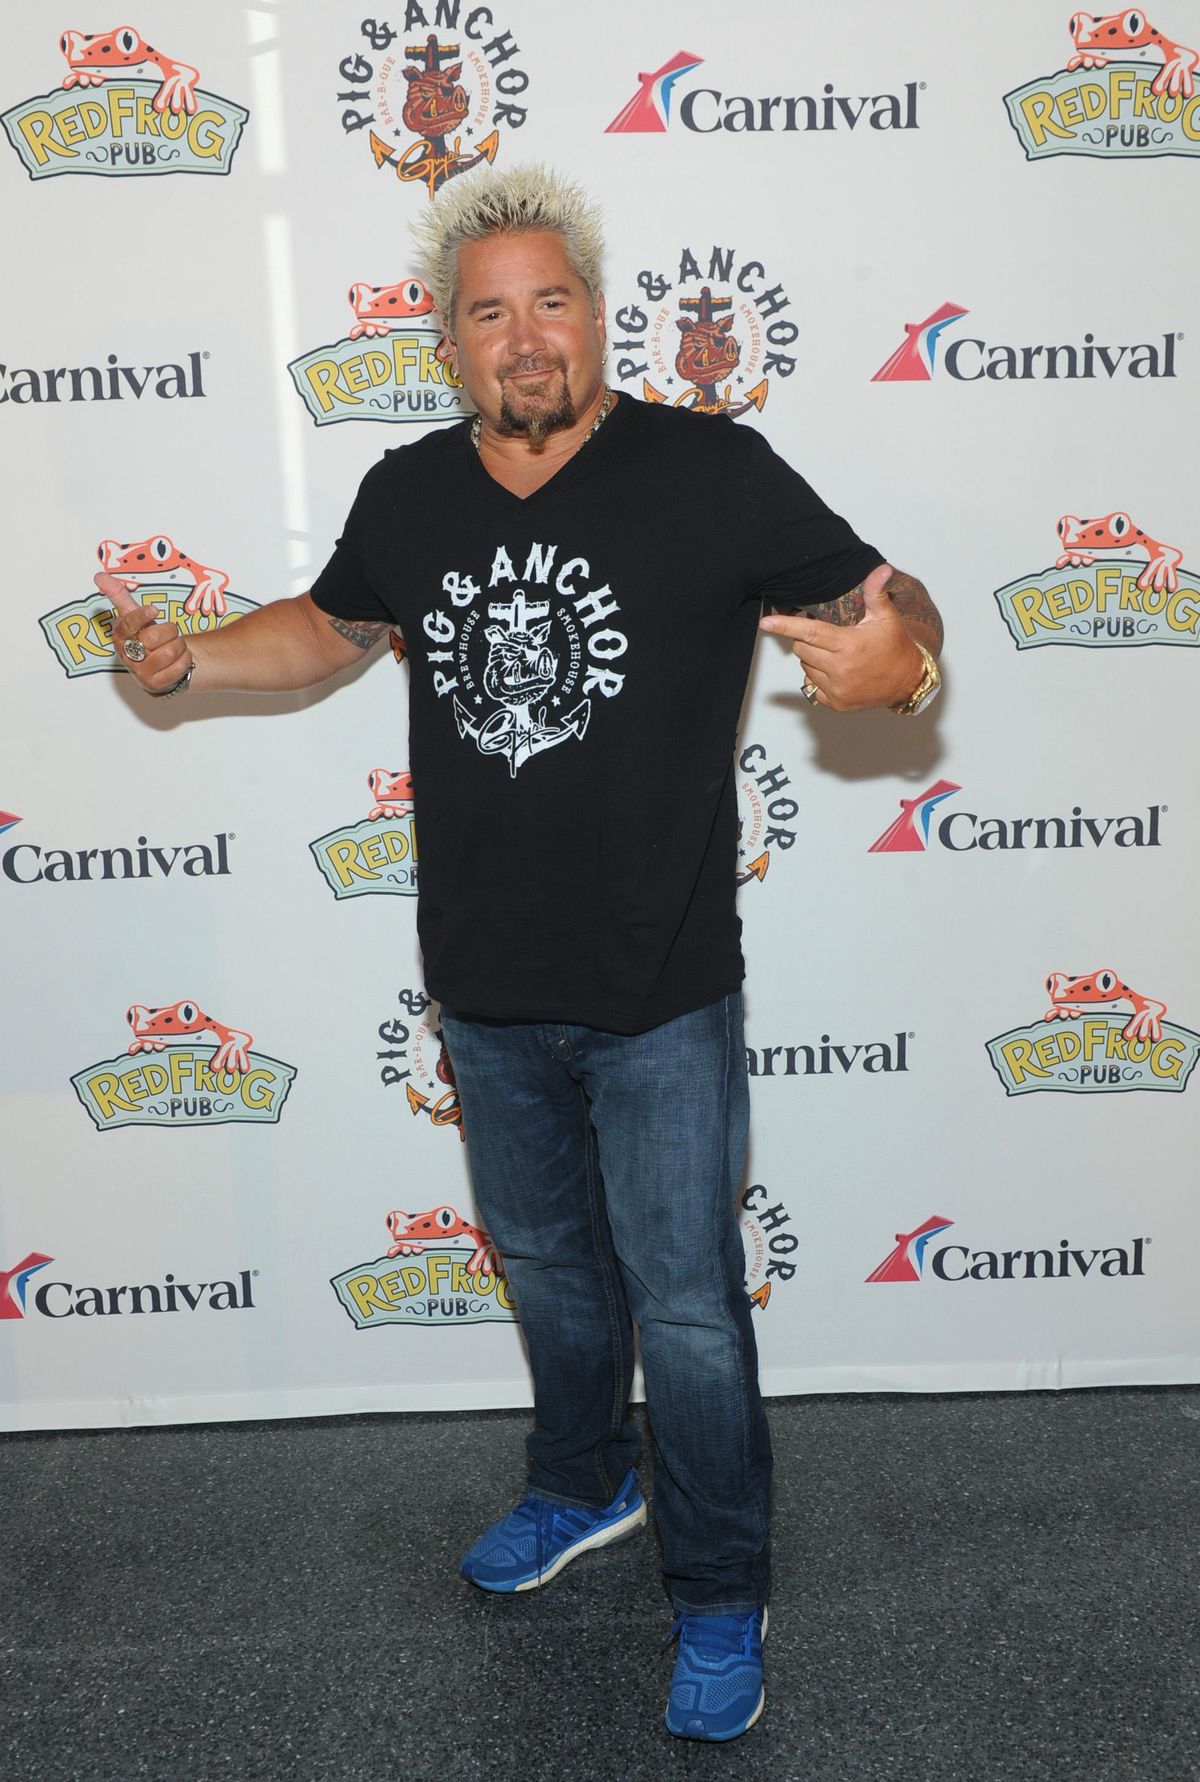 Food Network star Guy Fieri attends Carnival’s Summertime Beer-B-Que, featuring food from his Pig & Anchor Bar-B-Que Smokehouse, exclusively on Carnival Cruise Line, in this 2016 file photo. (Diane Bondareff / AP Images for Carnival Cruise Line)